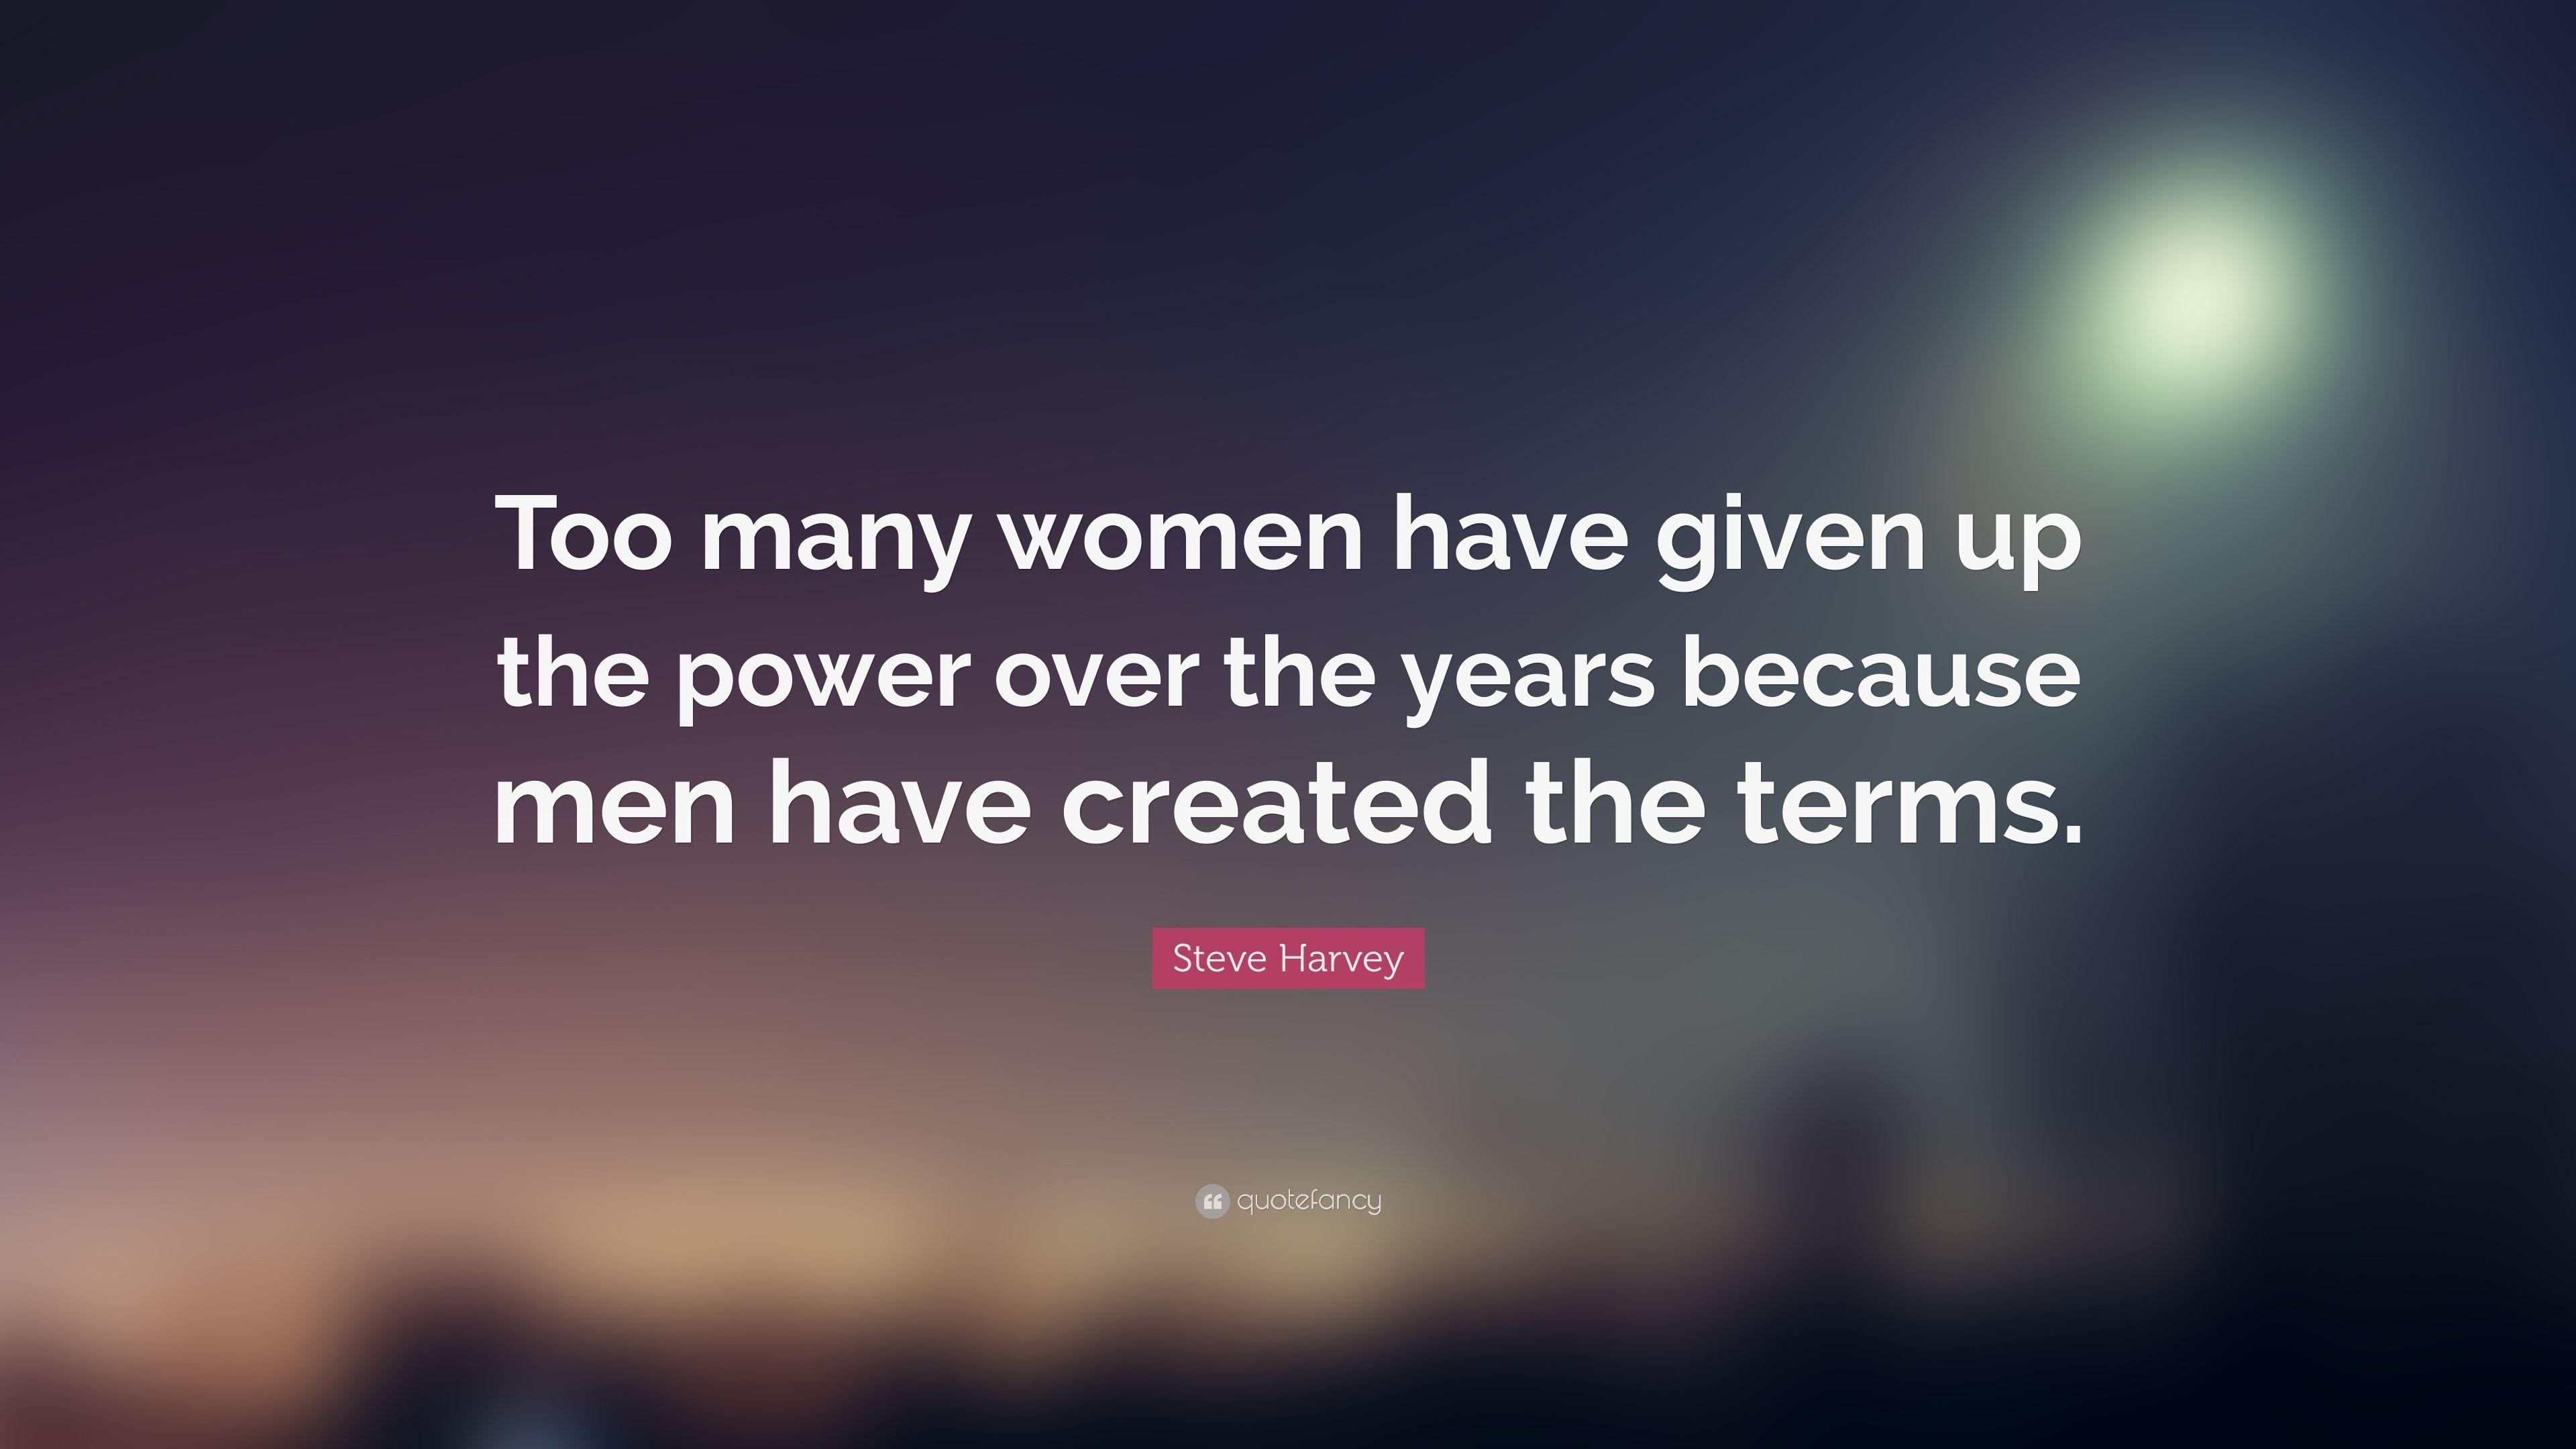 Steve Harvey Quote: “Too many women have given up the power over